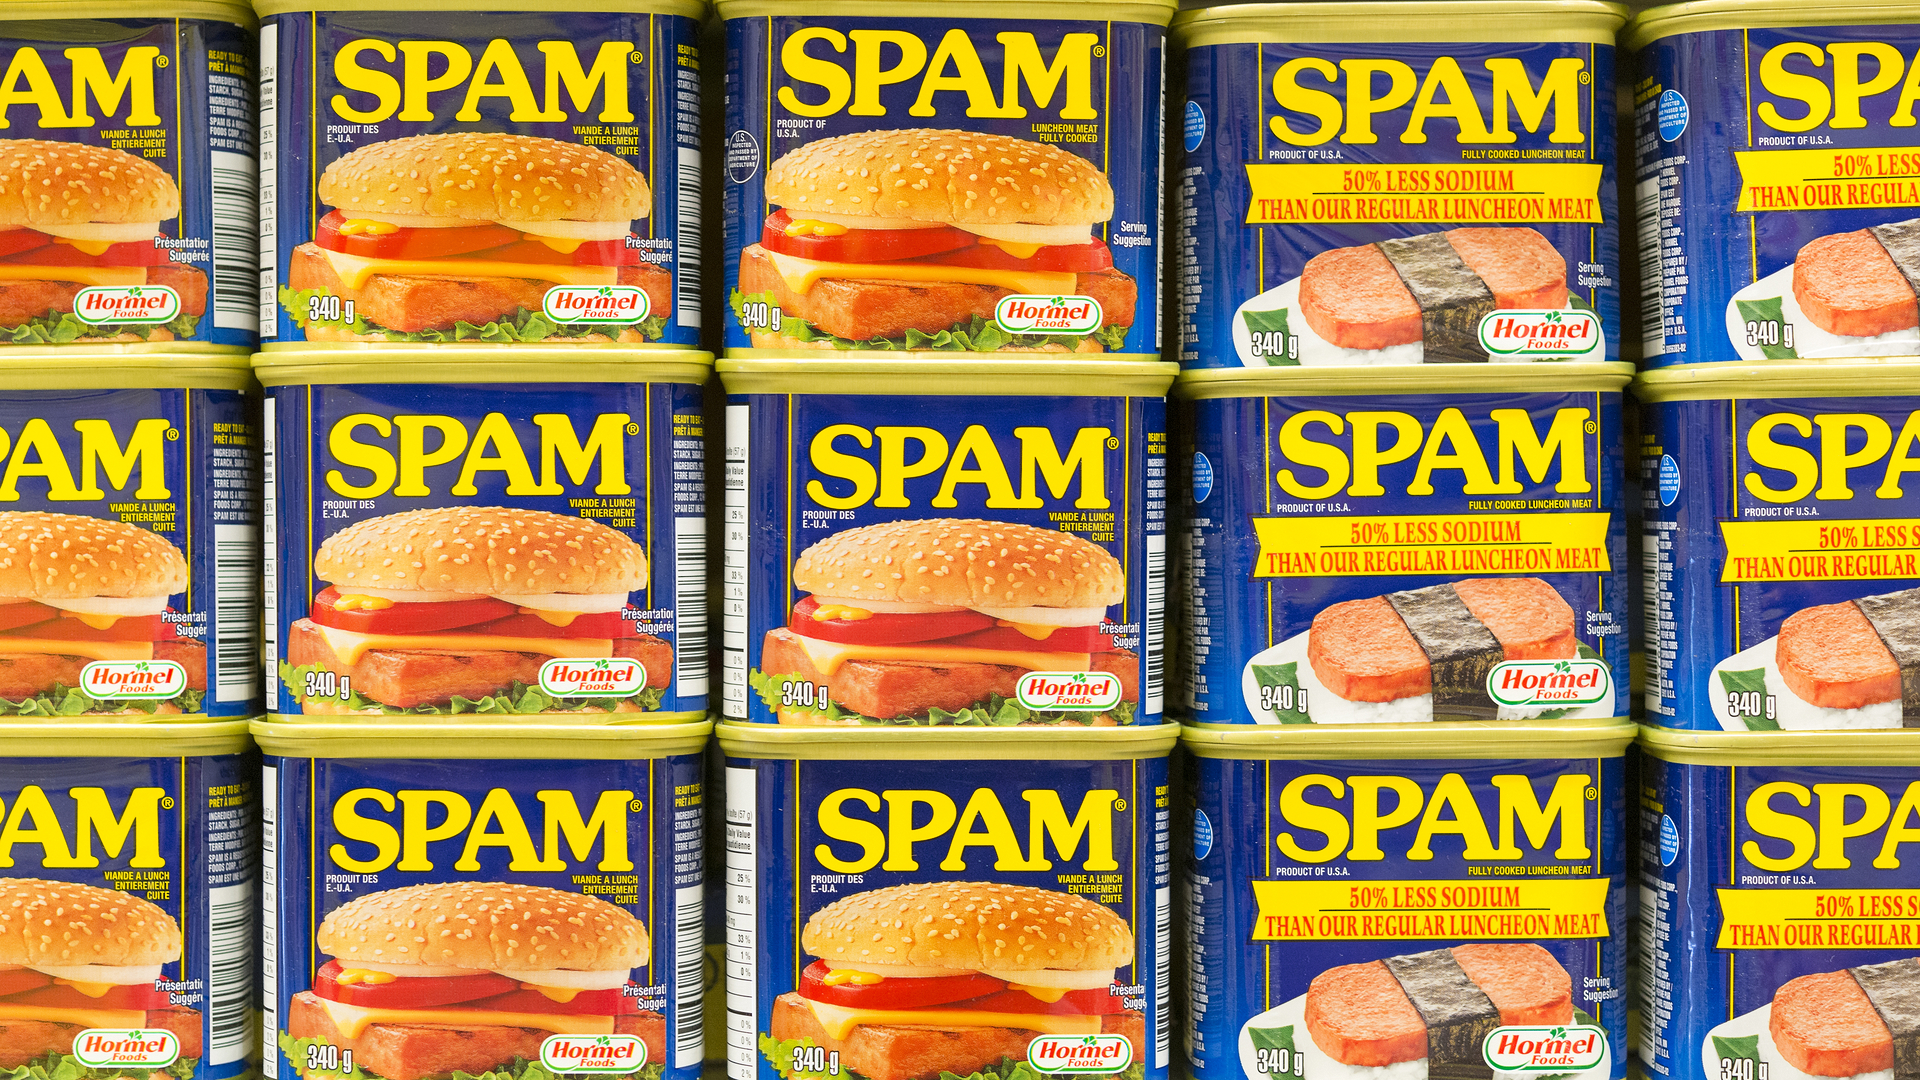 Marketing Psa Cold Lead Generation Is Spam Land